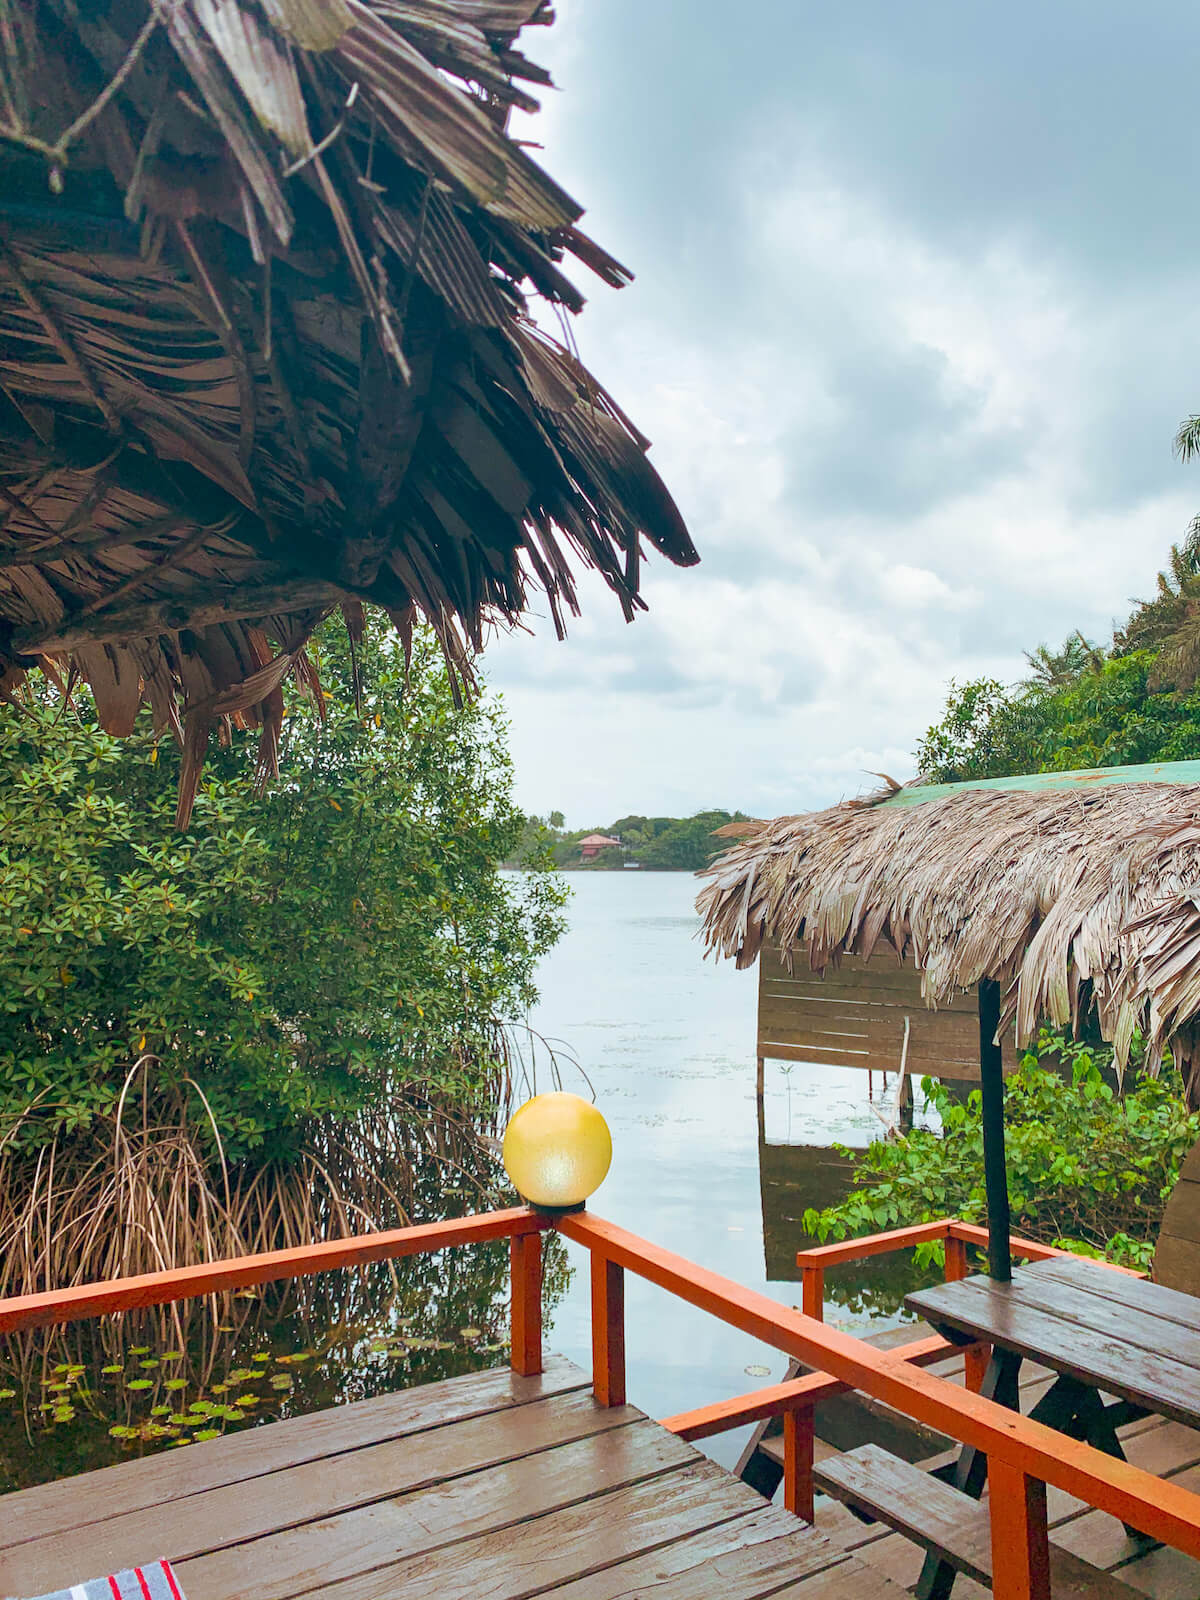 View over the water from palapa cabanas at Mangrove Lodge in Liberia